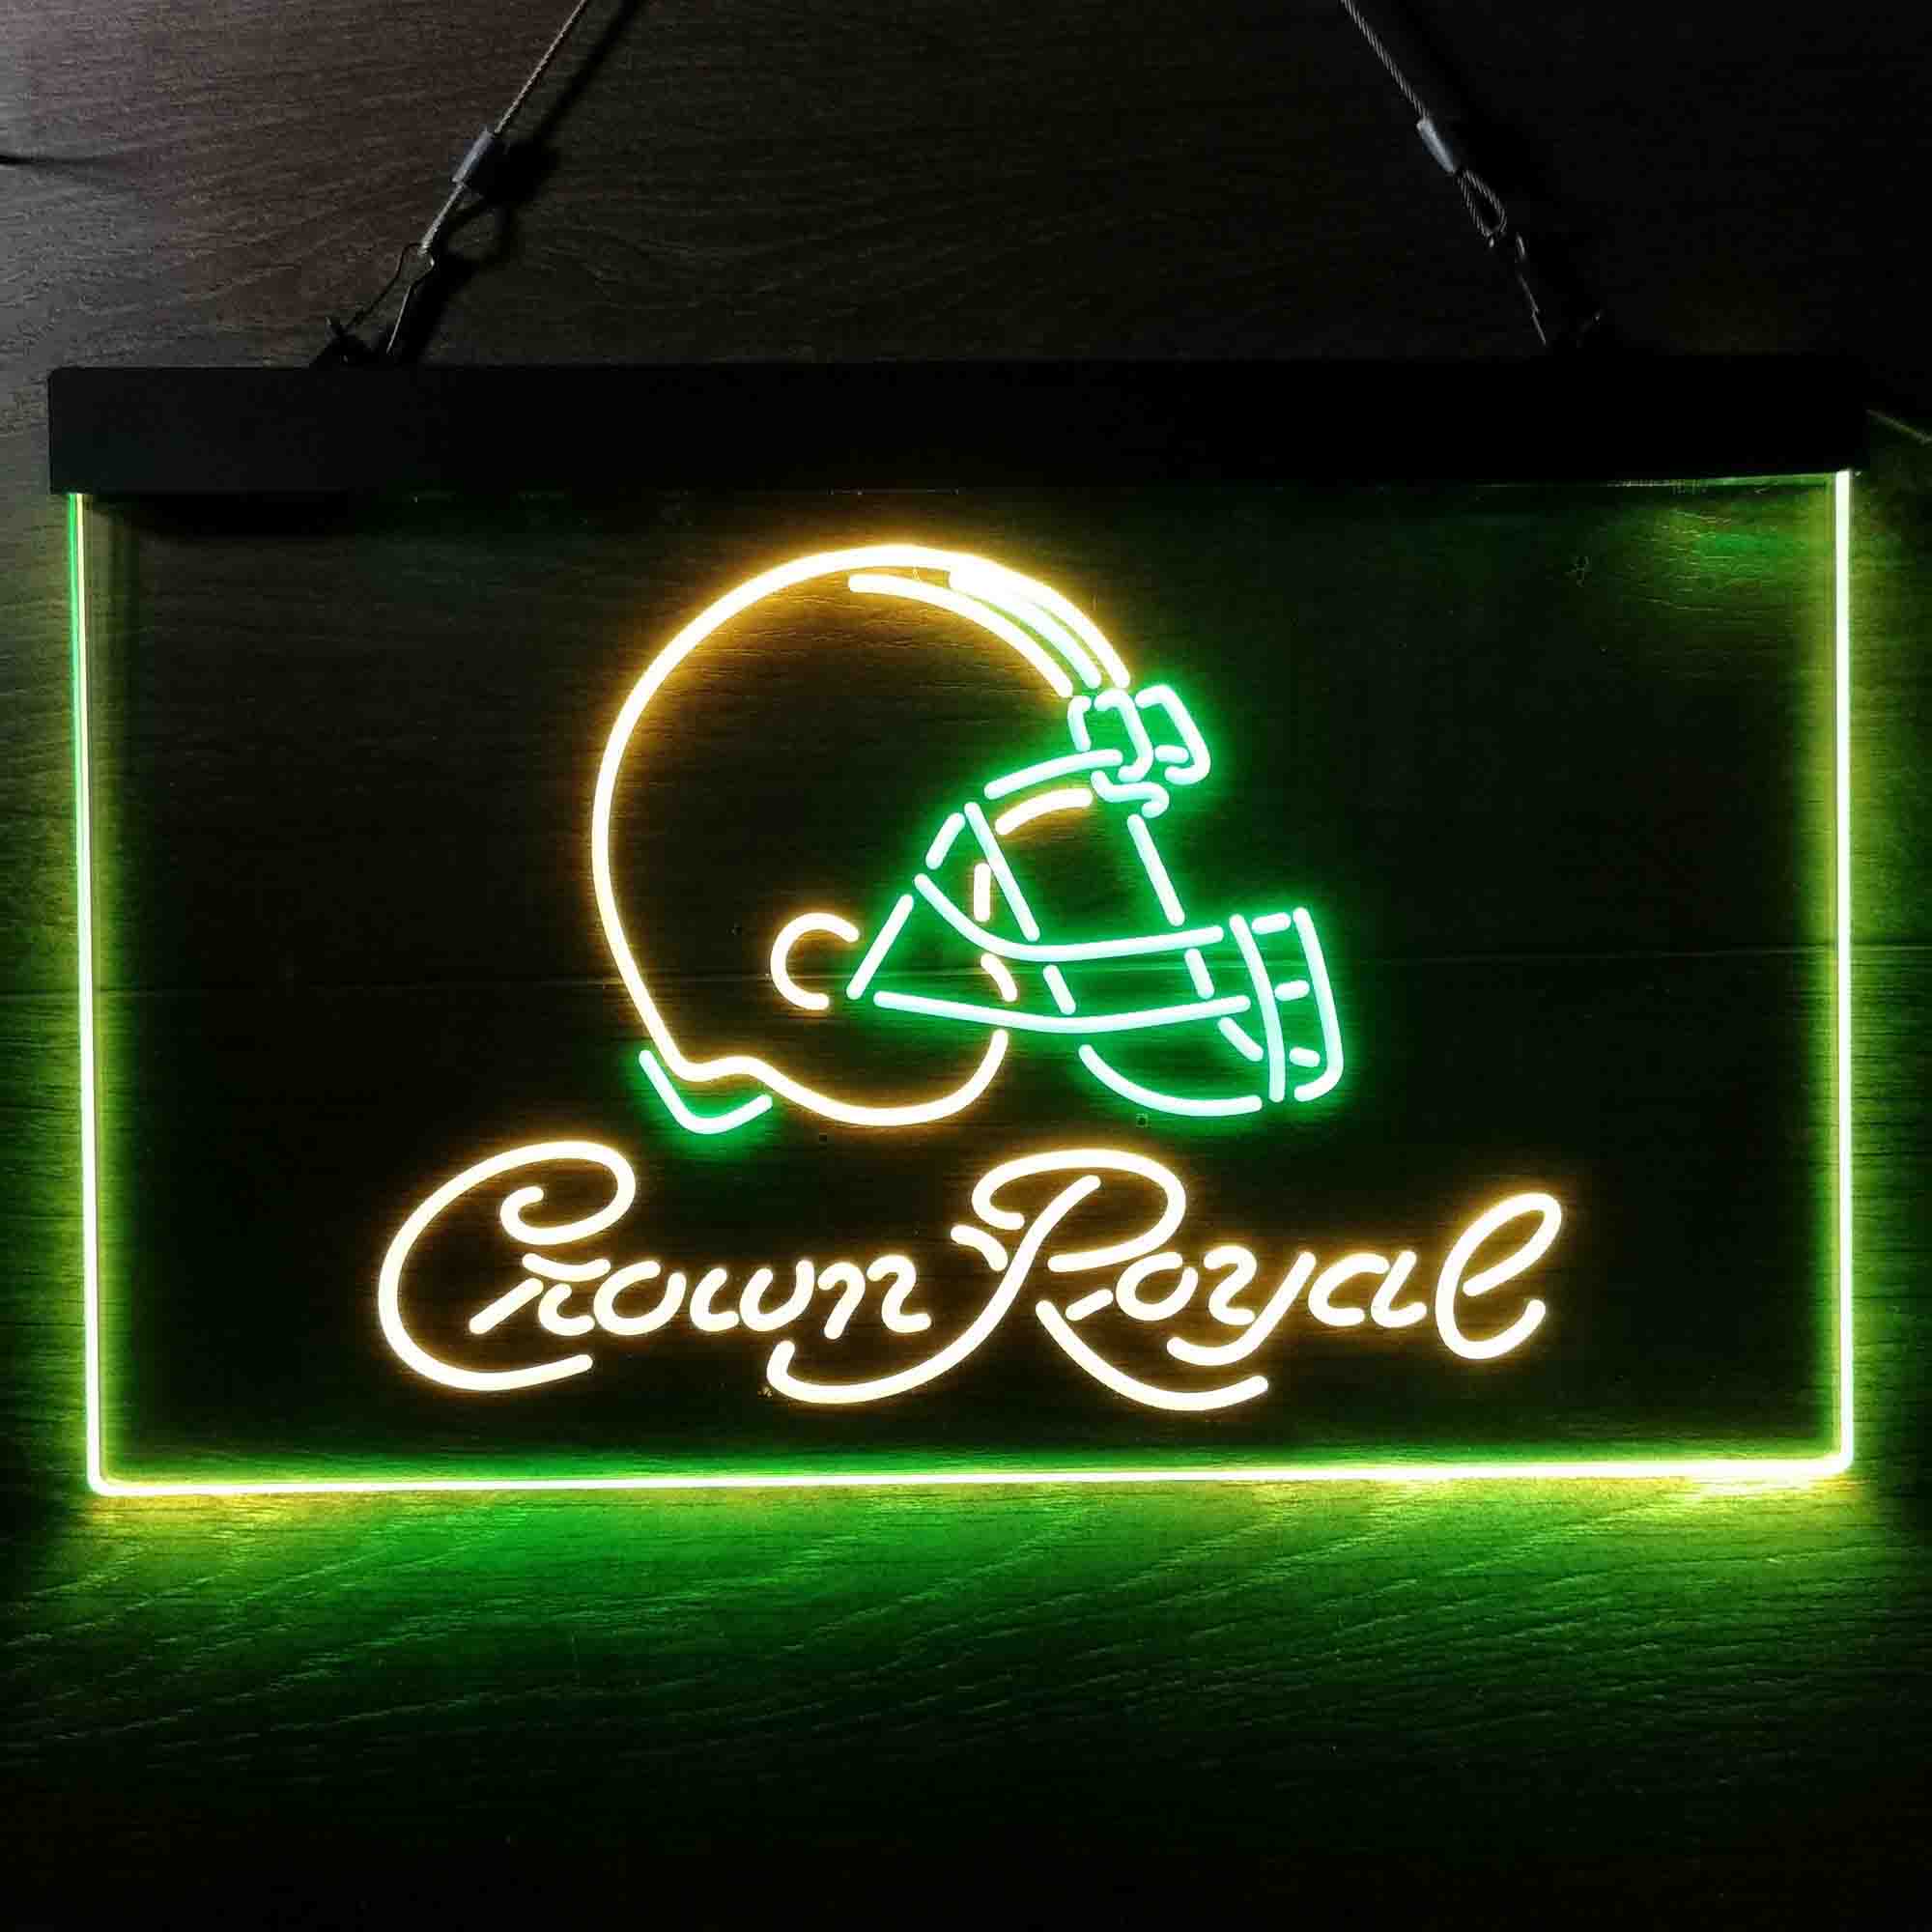 Cleveland Browns Crown Royal Neon LED Sign